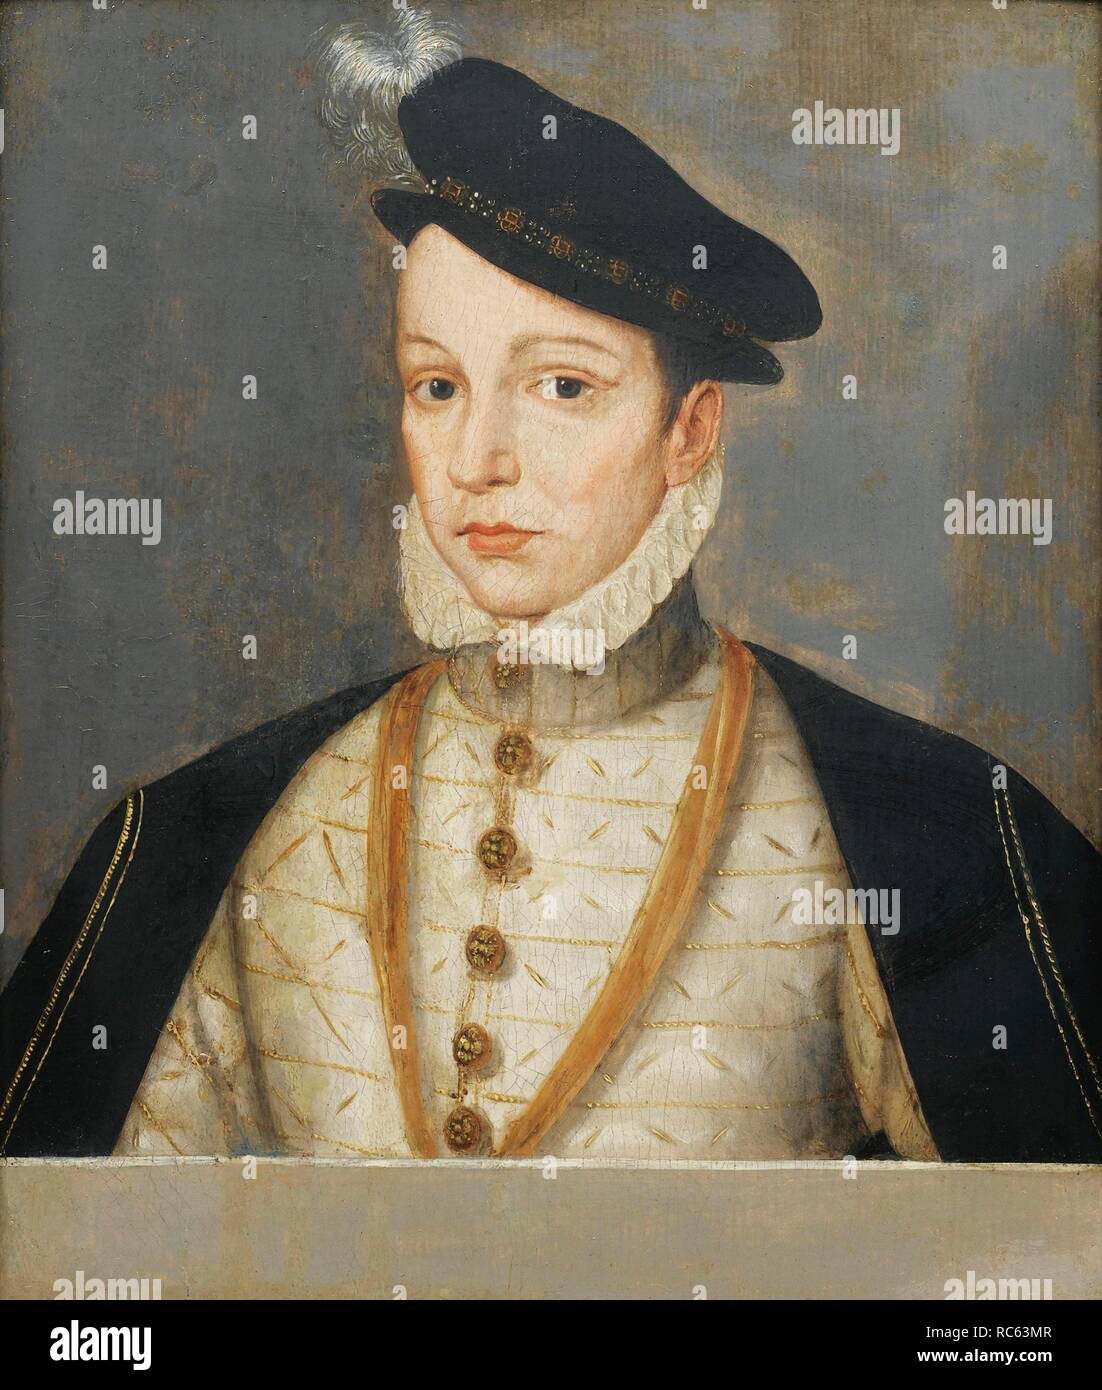 Portrait of King Charles IX of France (1550-1574). Museum: PRIVATE COLLECTION. Author: CLOUET, FRANÇOIS. Stock Photo